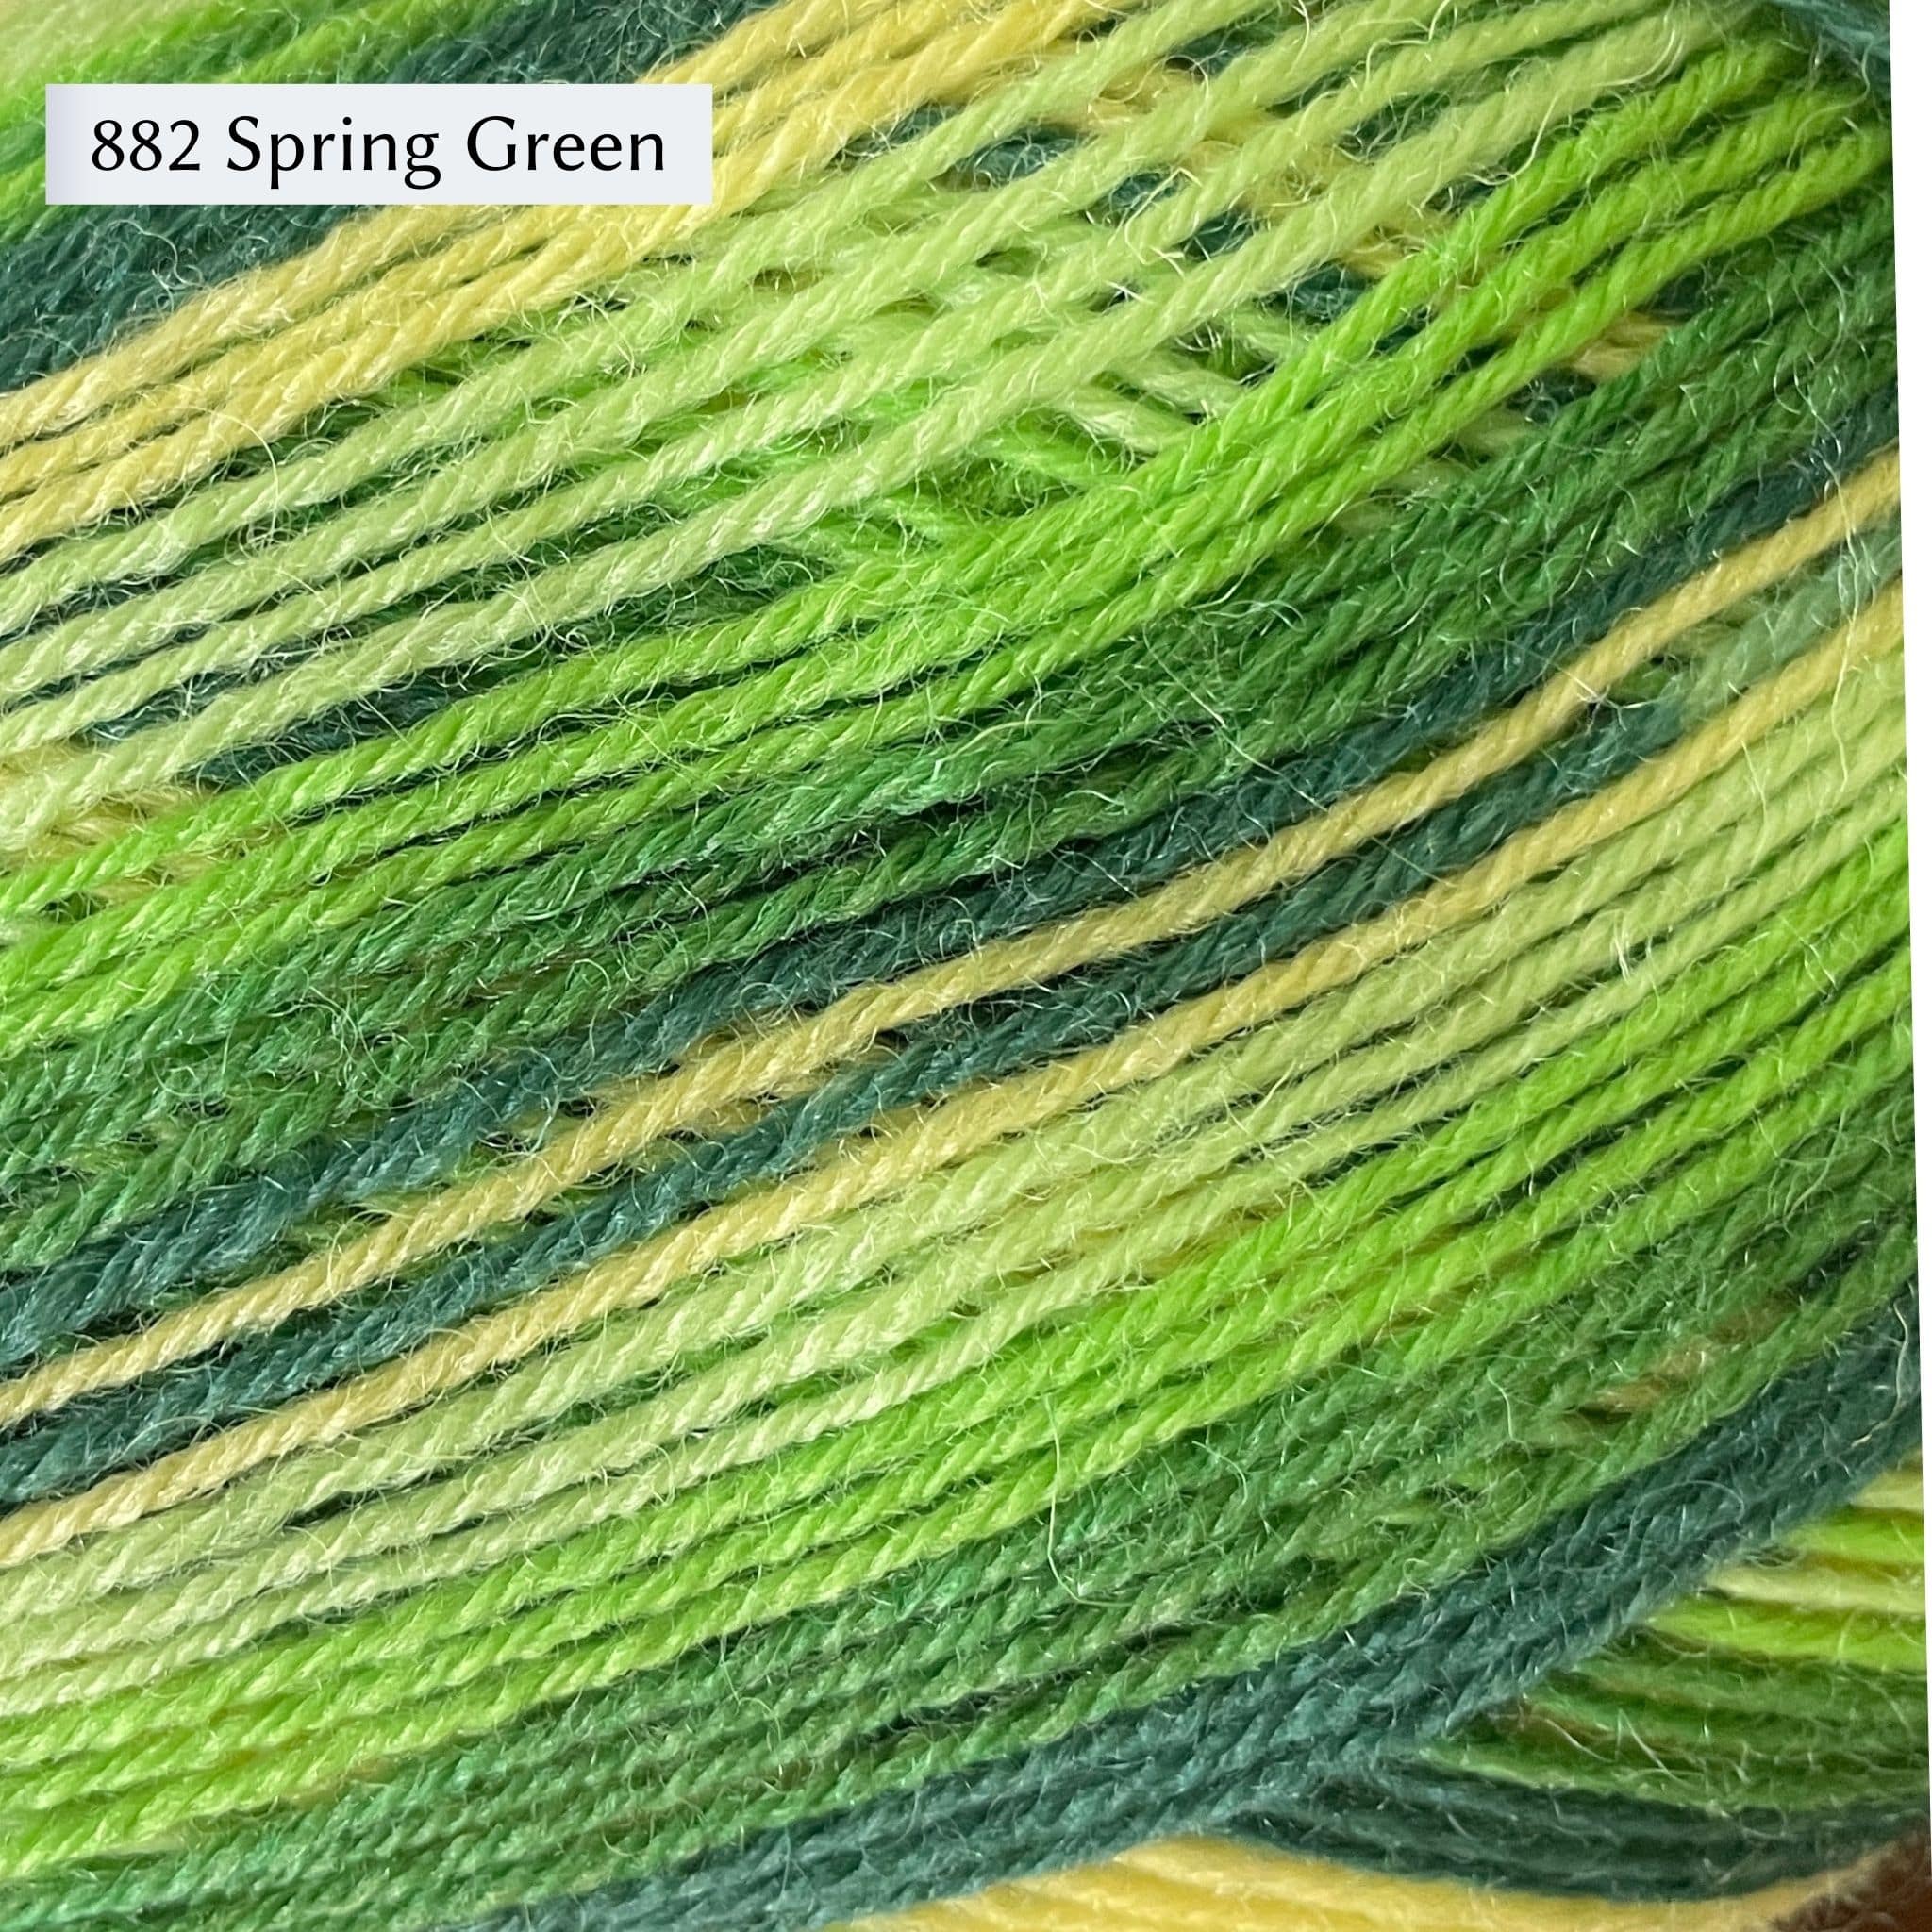 West Yorkshire Spinners Signature 4ply yarn, fingering weight, in color 882 Spring Green, a striping colorway in shades of green including light grass green, lime, kelly green, and forest green